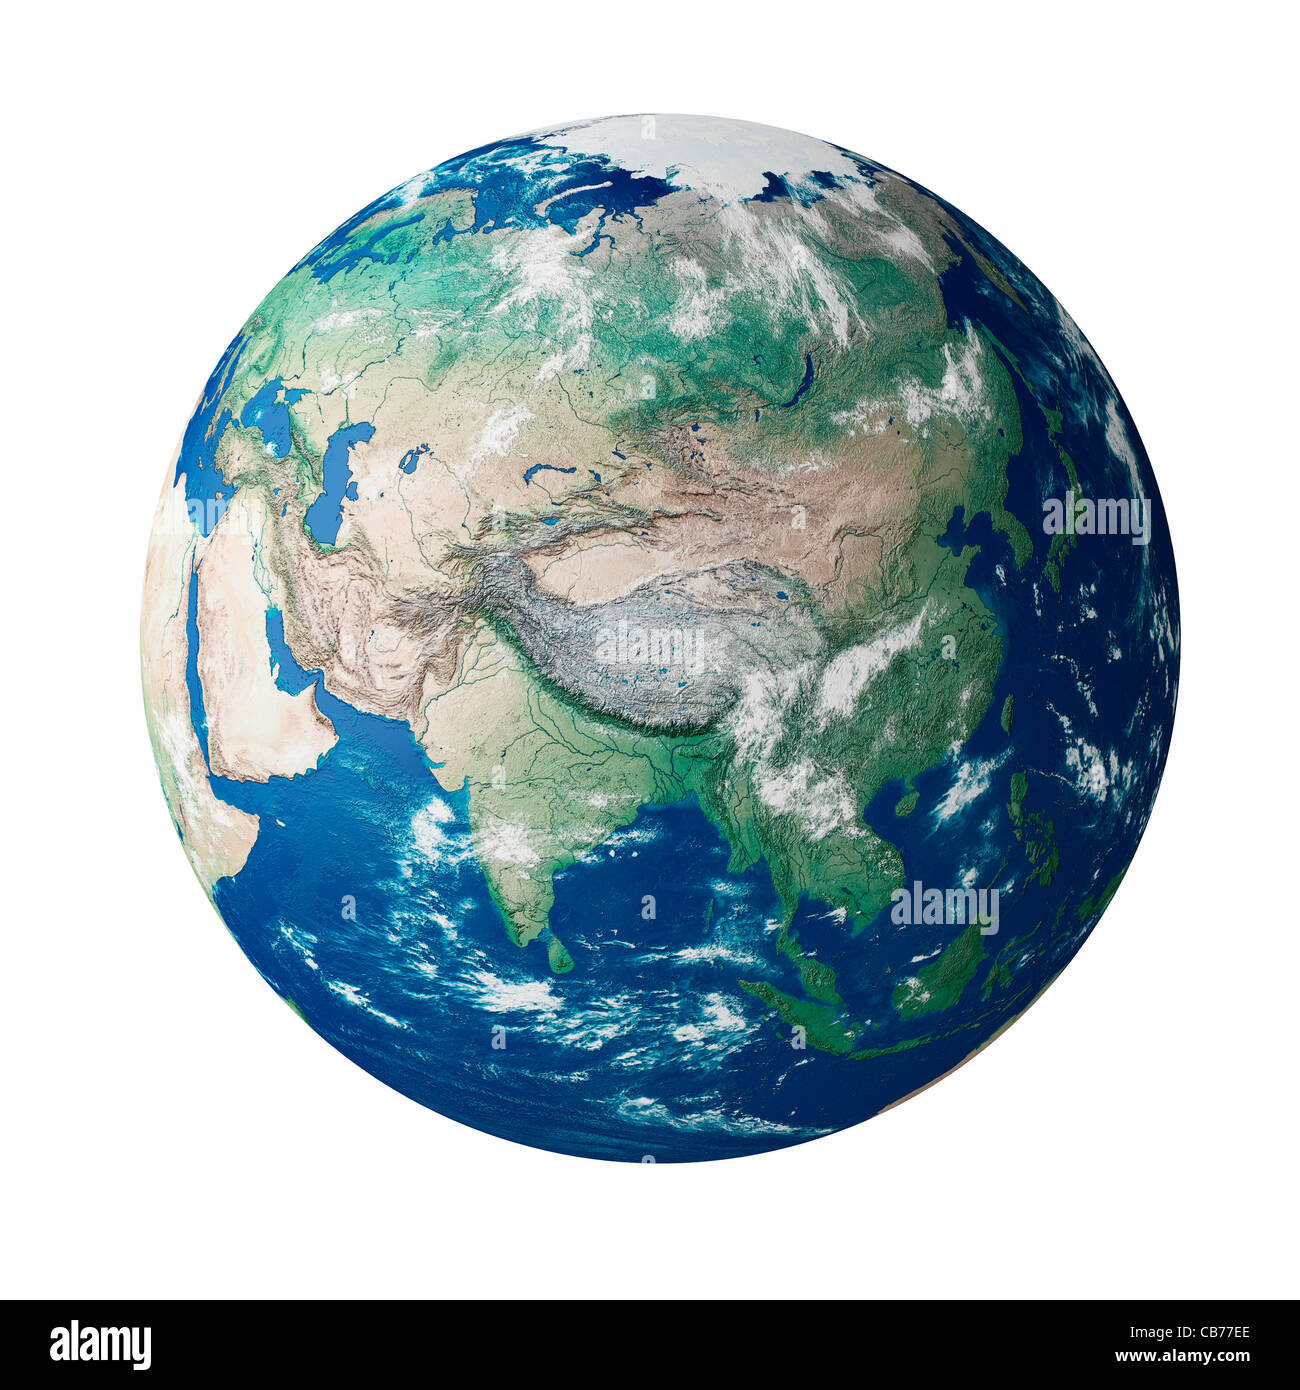 Globe showing the continent of Asia on planet earth Stock Photo